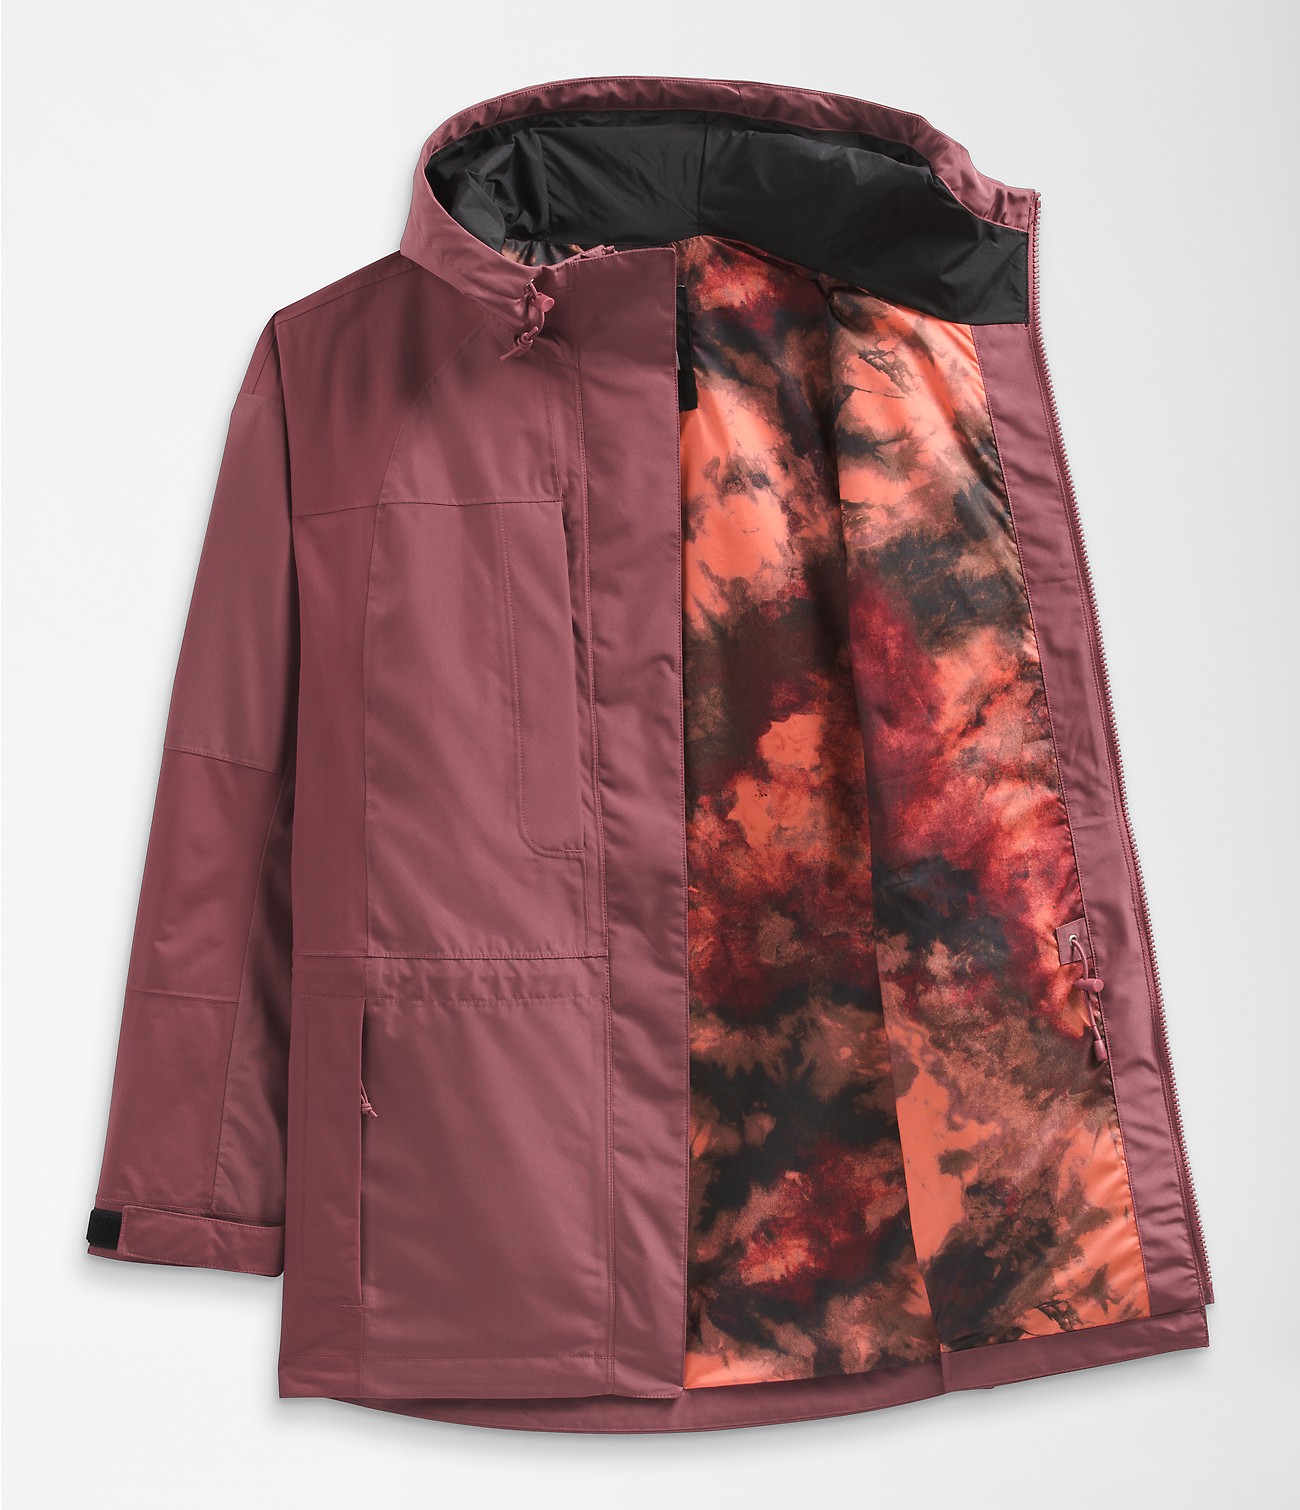 Women’s 2000 Mountain Jacket | The North Face